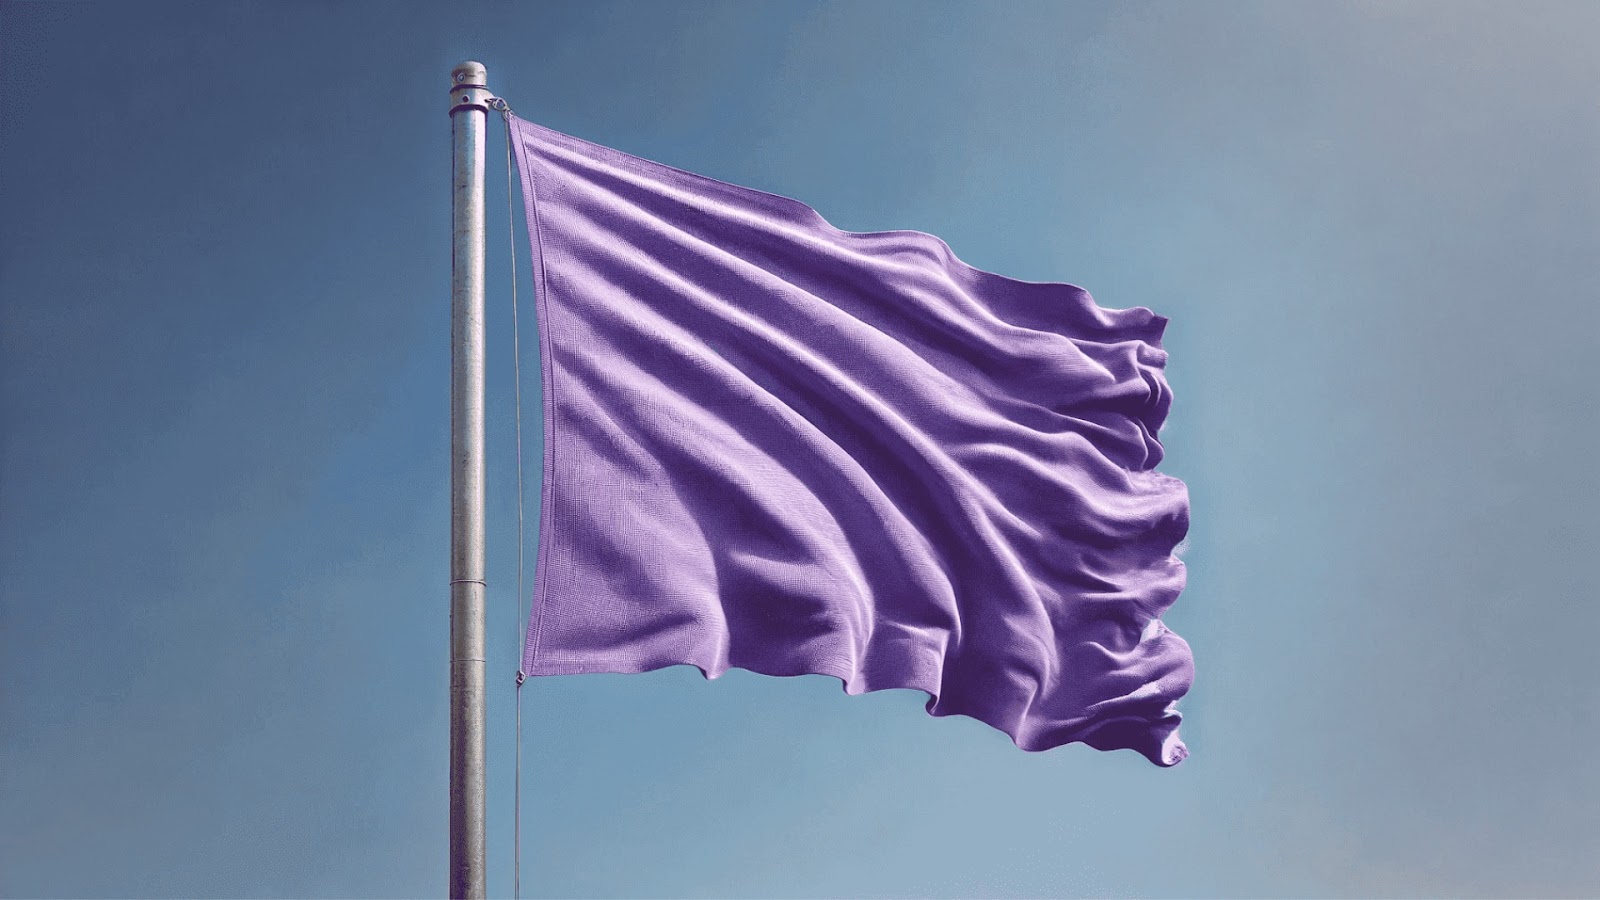 An image of a purple safety beach flag